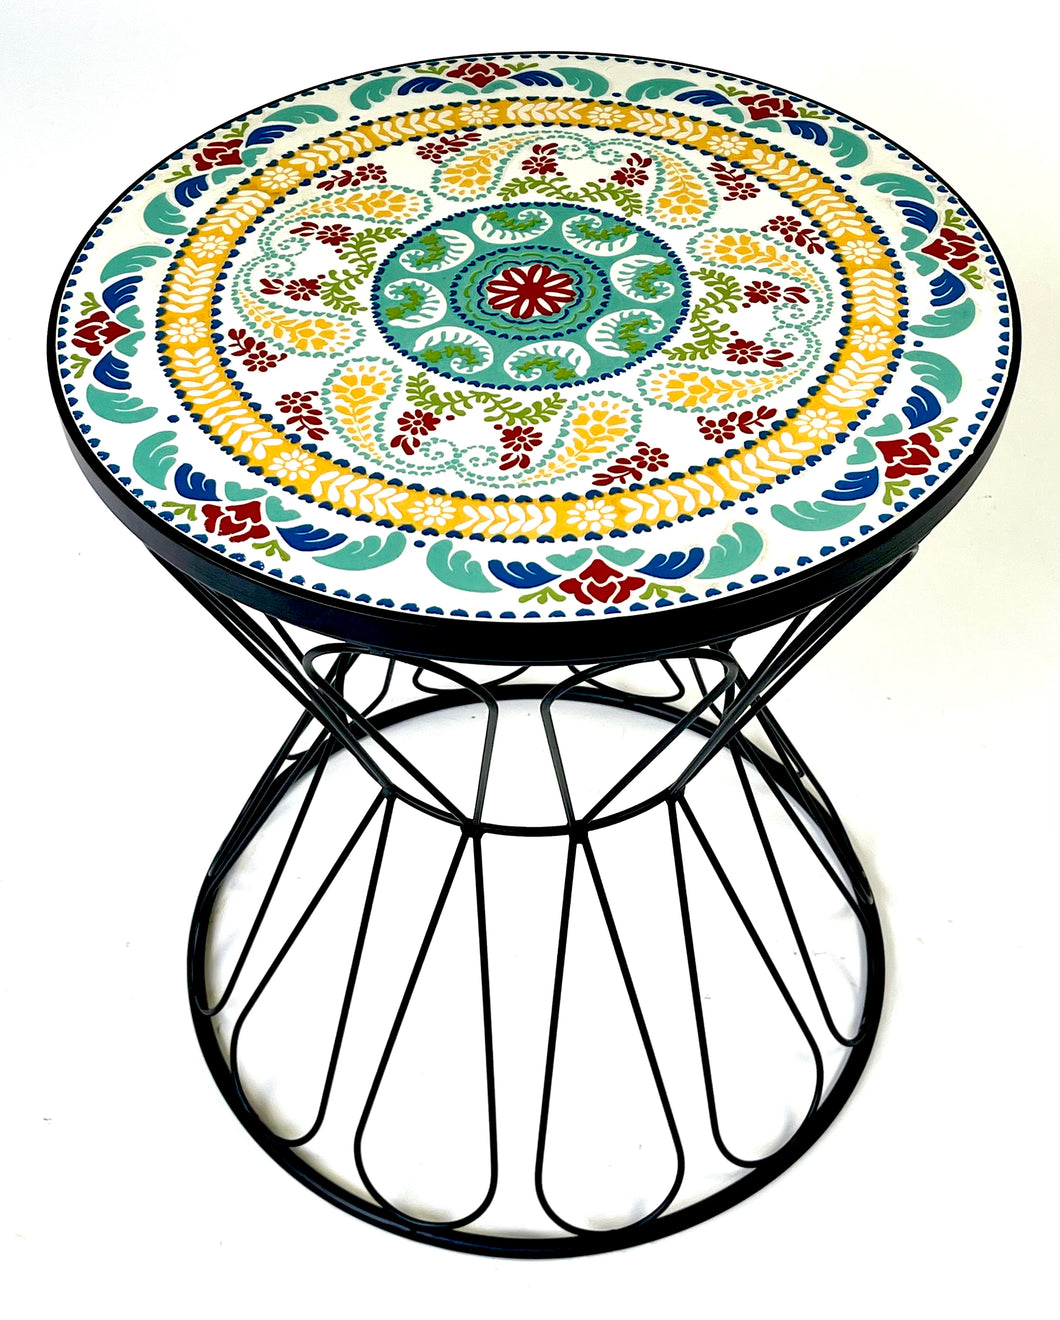 Mosaic Paisley Table/Plant Stand, 16in